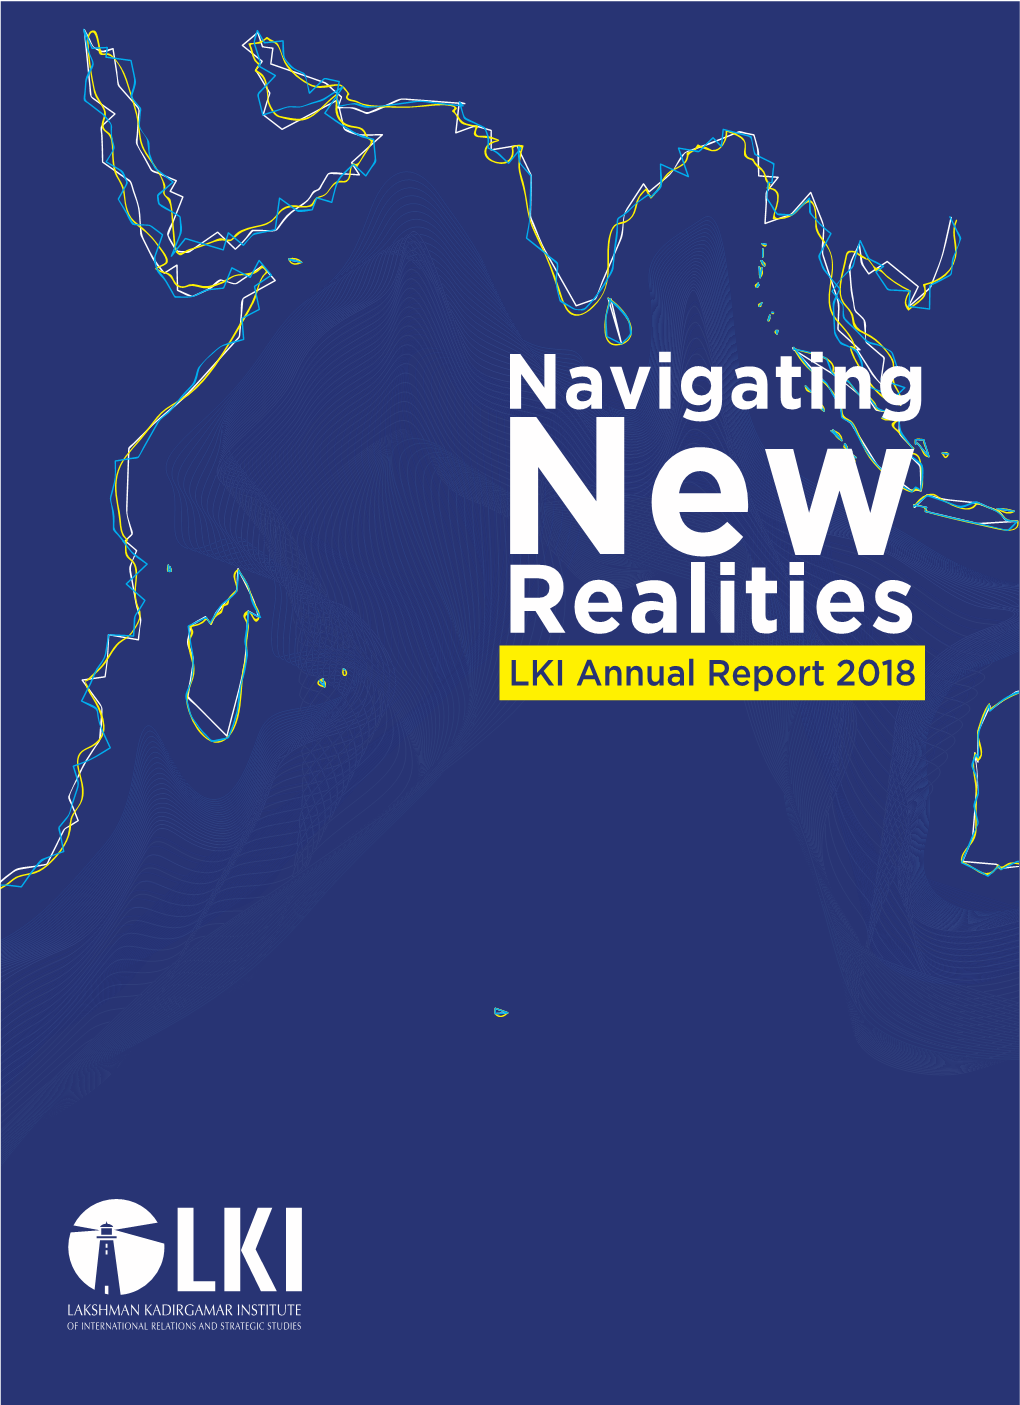 Realities LKI Annual Report 2018 Published : June 2019